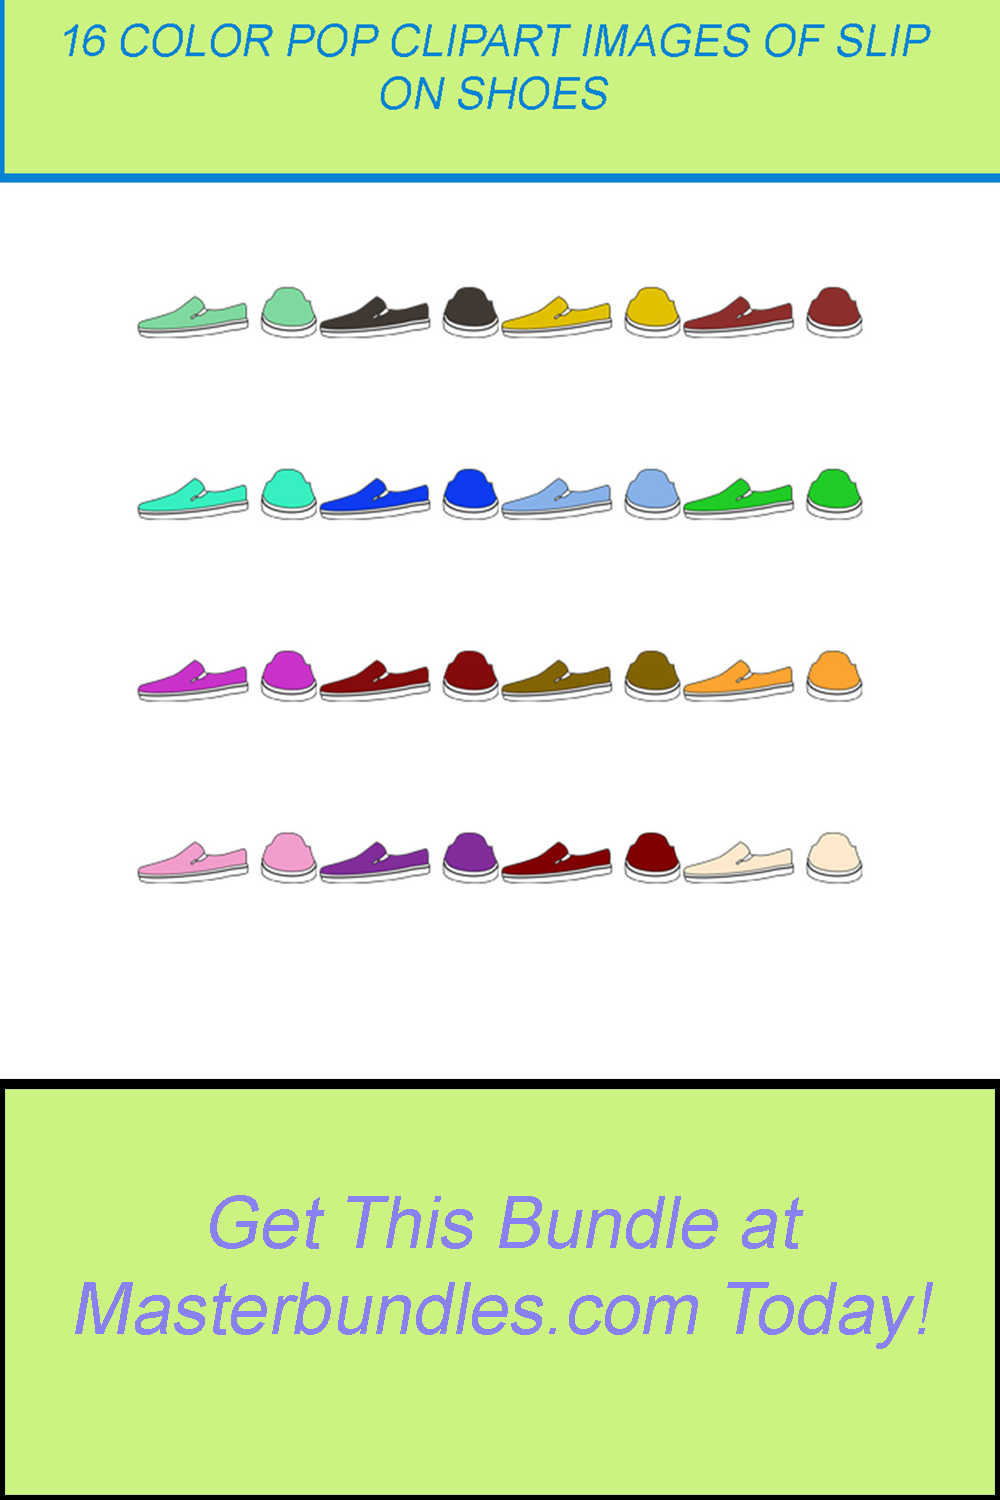 16 COLOR POP CLIPART IMAGES OF SLIP ON SHOES pinterest preview image.